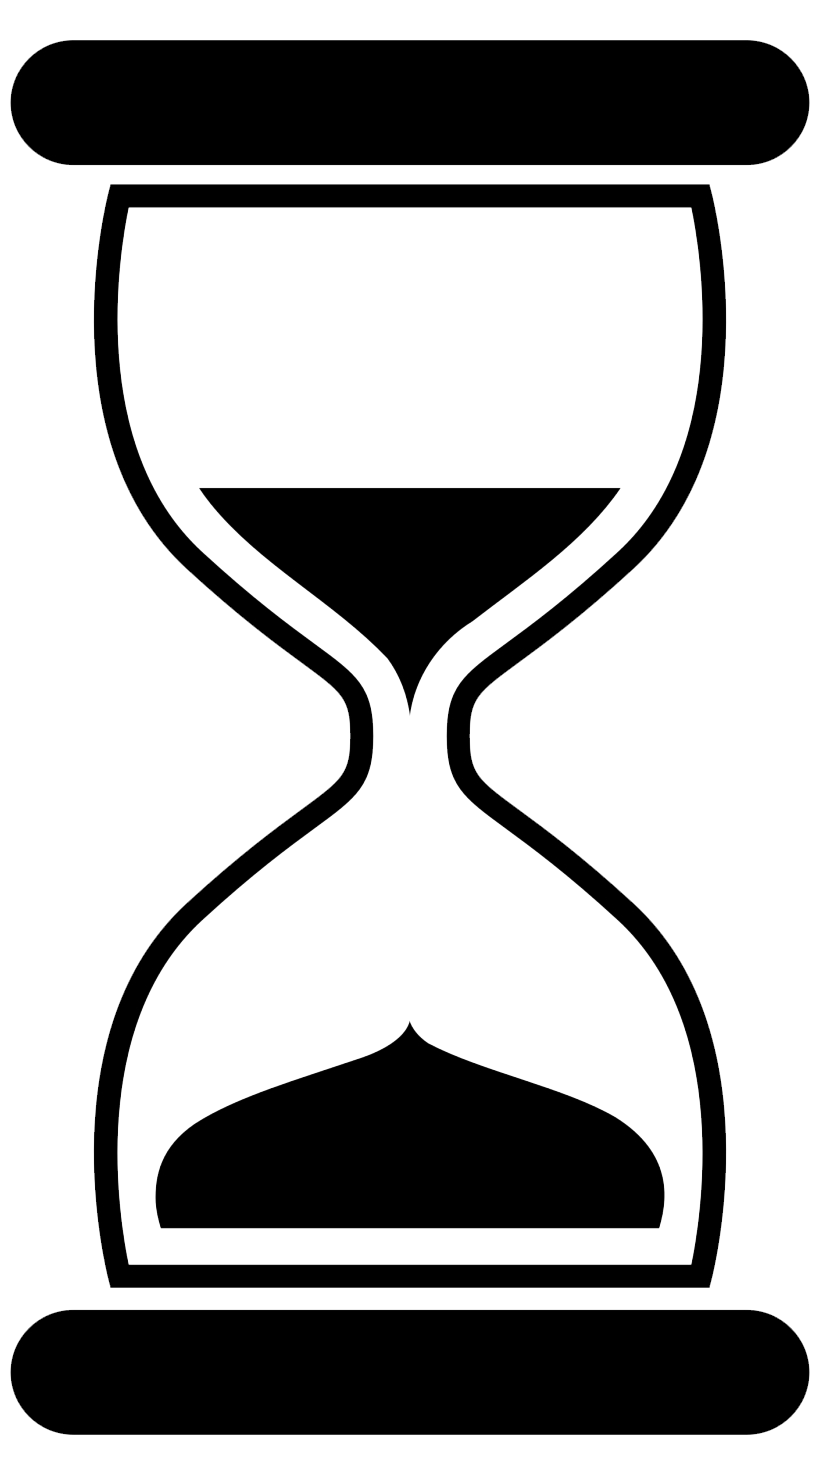 Black Hourglass PNG Free Download